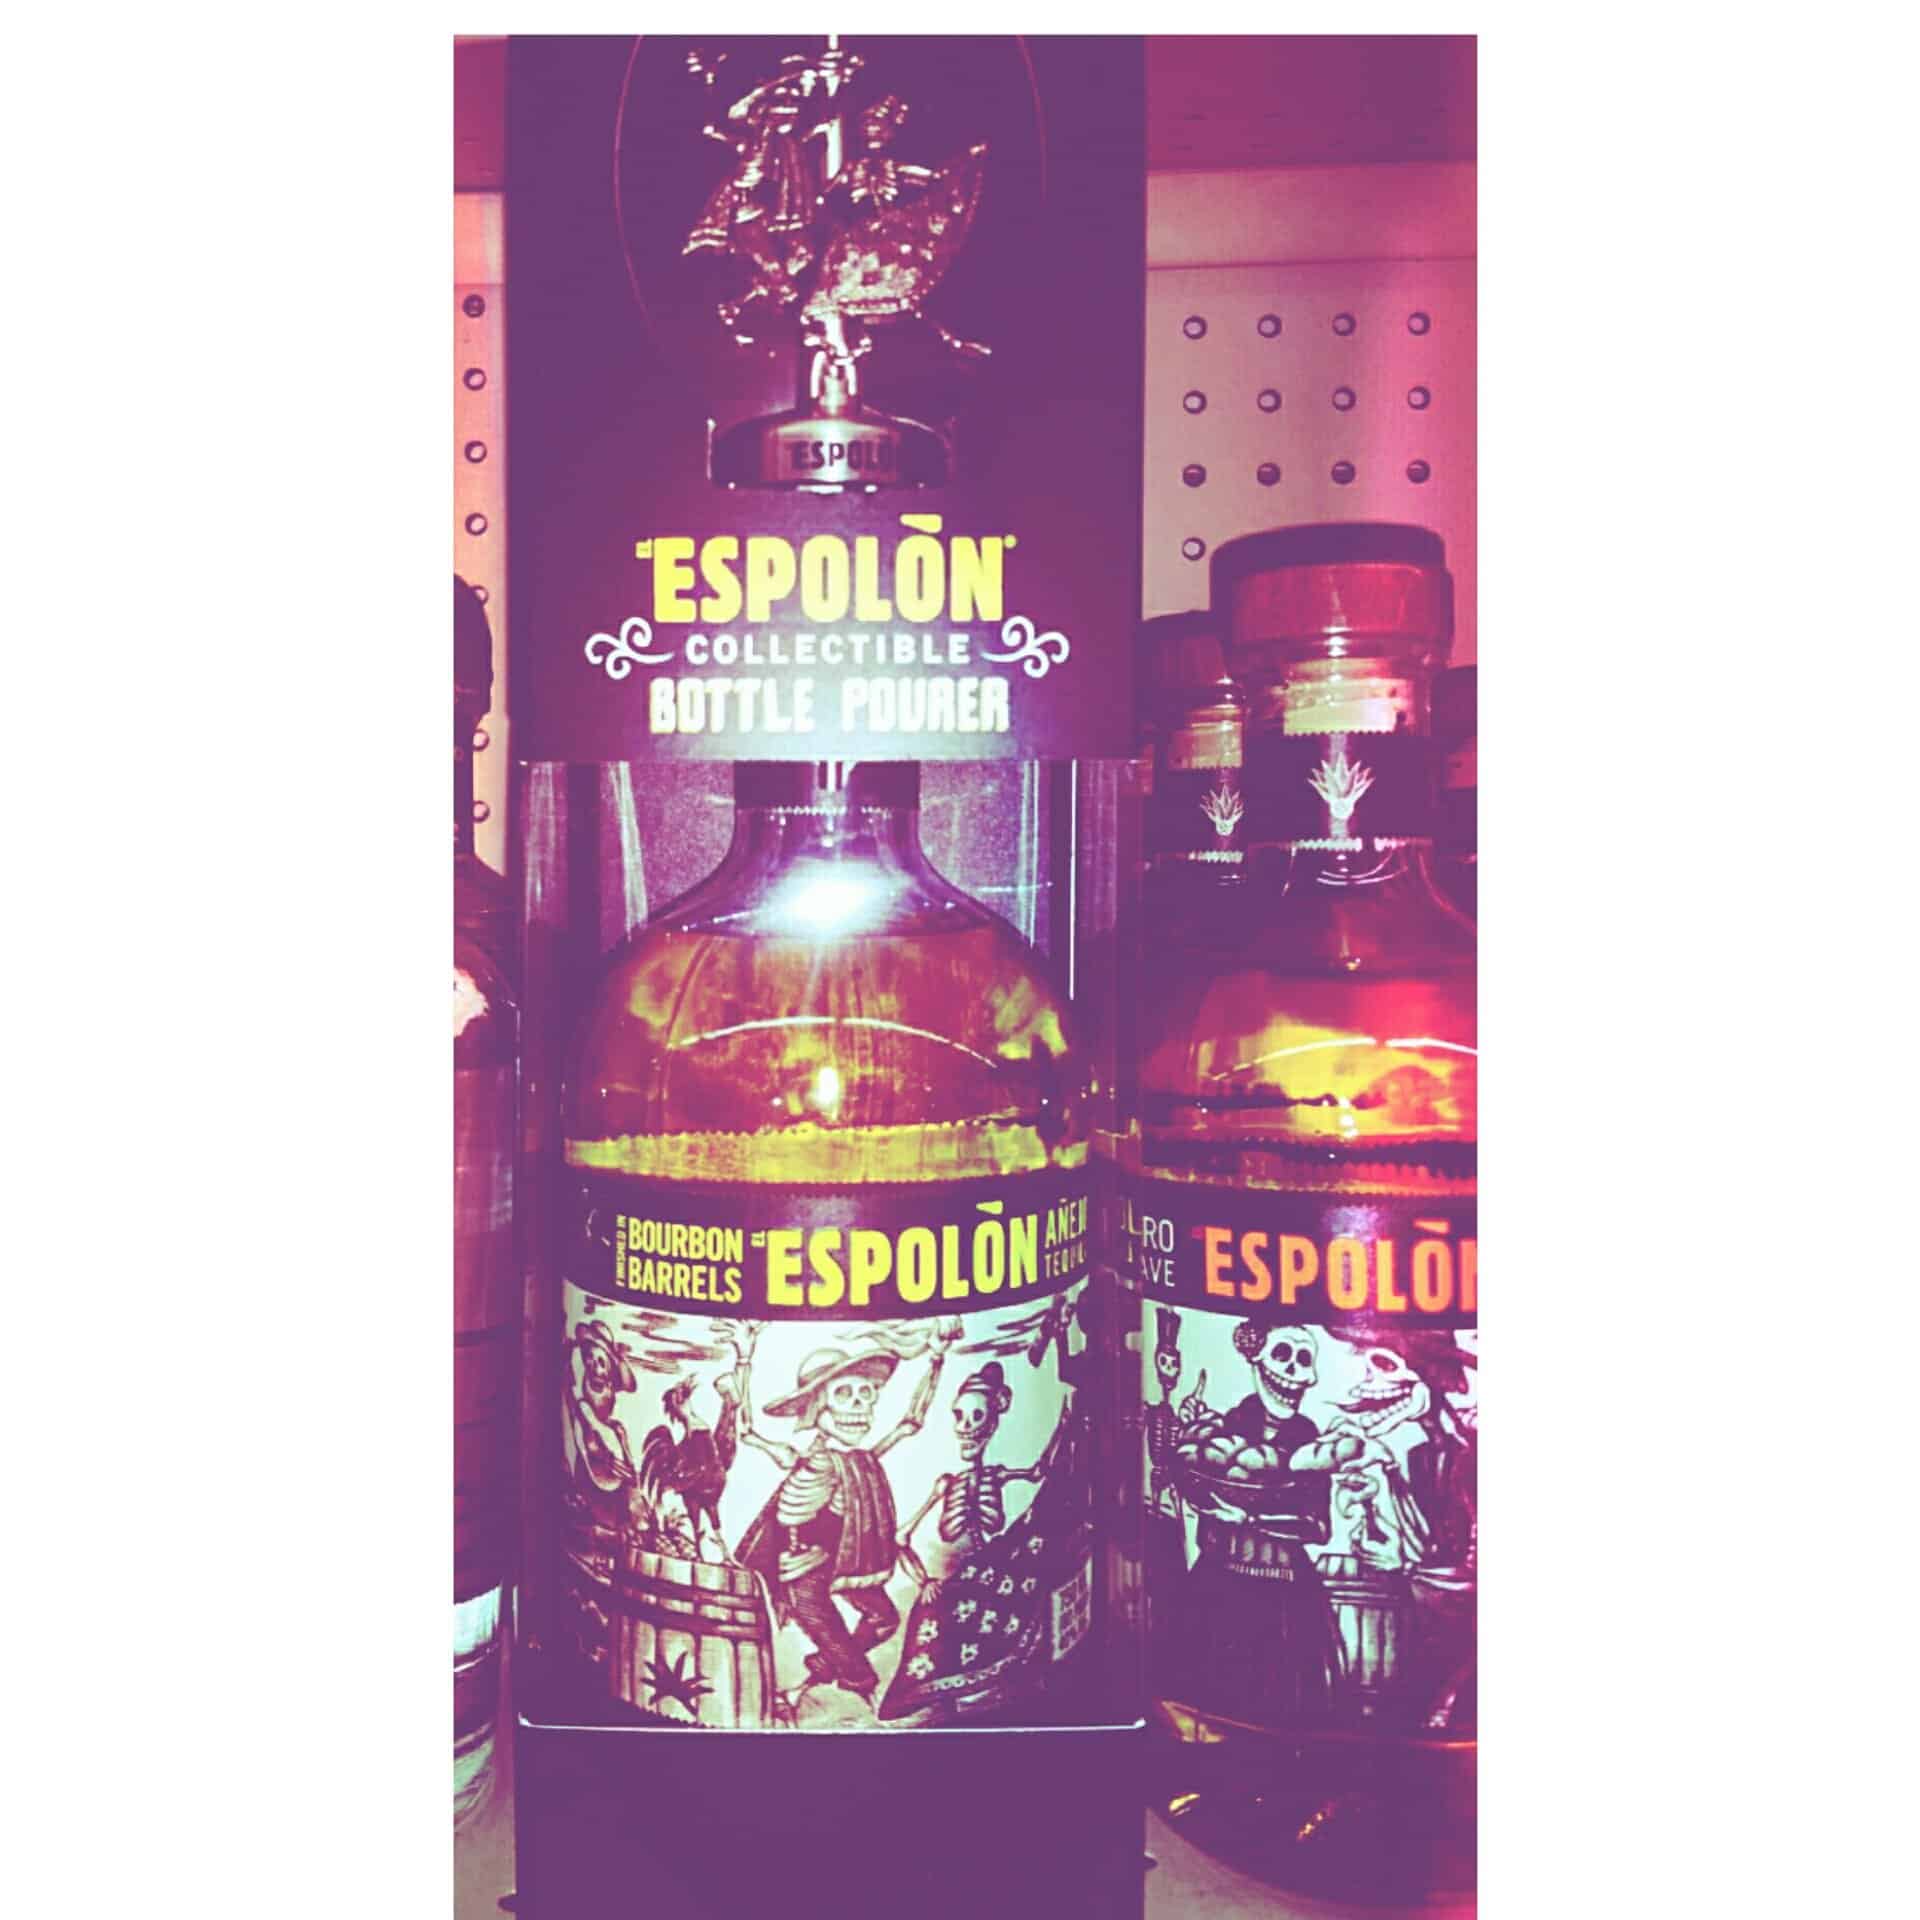 THIS JUST IN: ESPÓLON TEQUILA RELEASES BOURBON BARREL AGED TEQUILA!